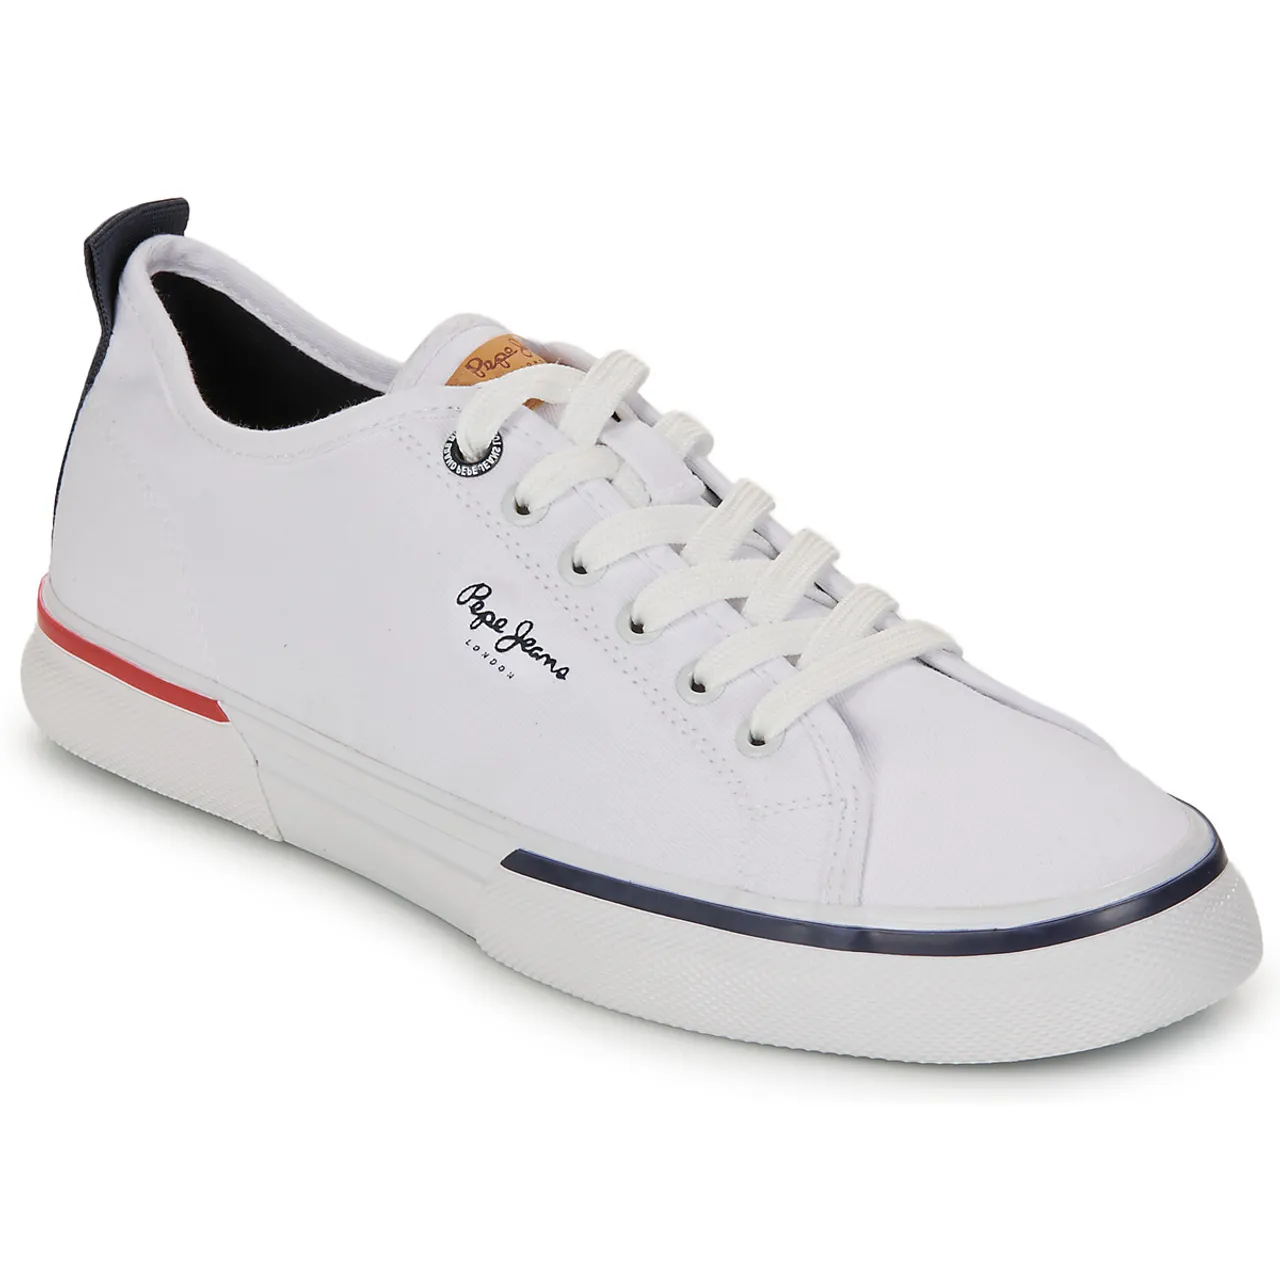 Pepe jeans  KENTON SMART M  men's Shoes (Trainers) in White